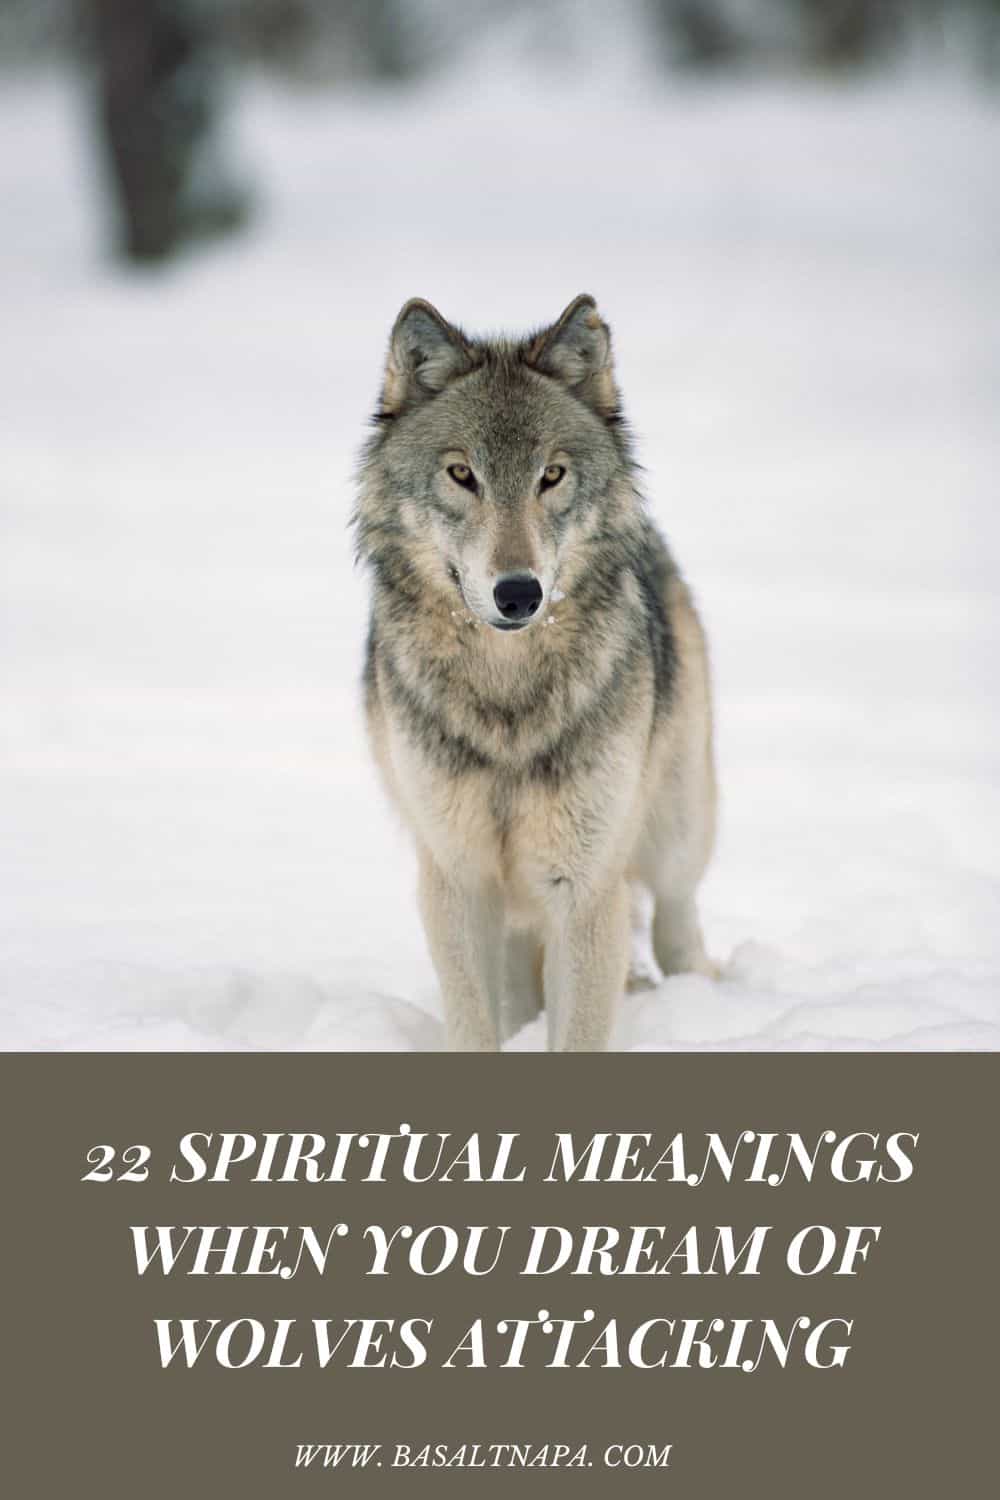 22 Spiritual Meanings When You Dream Of Wolves Attacking